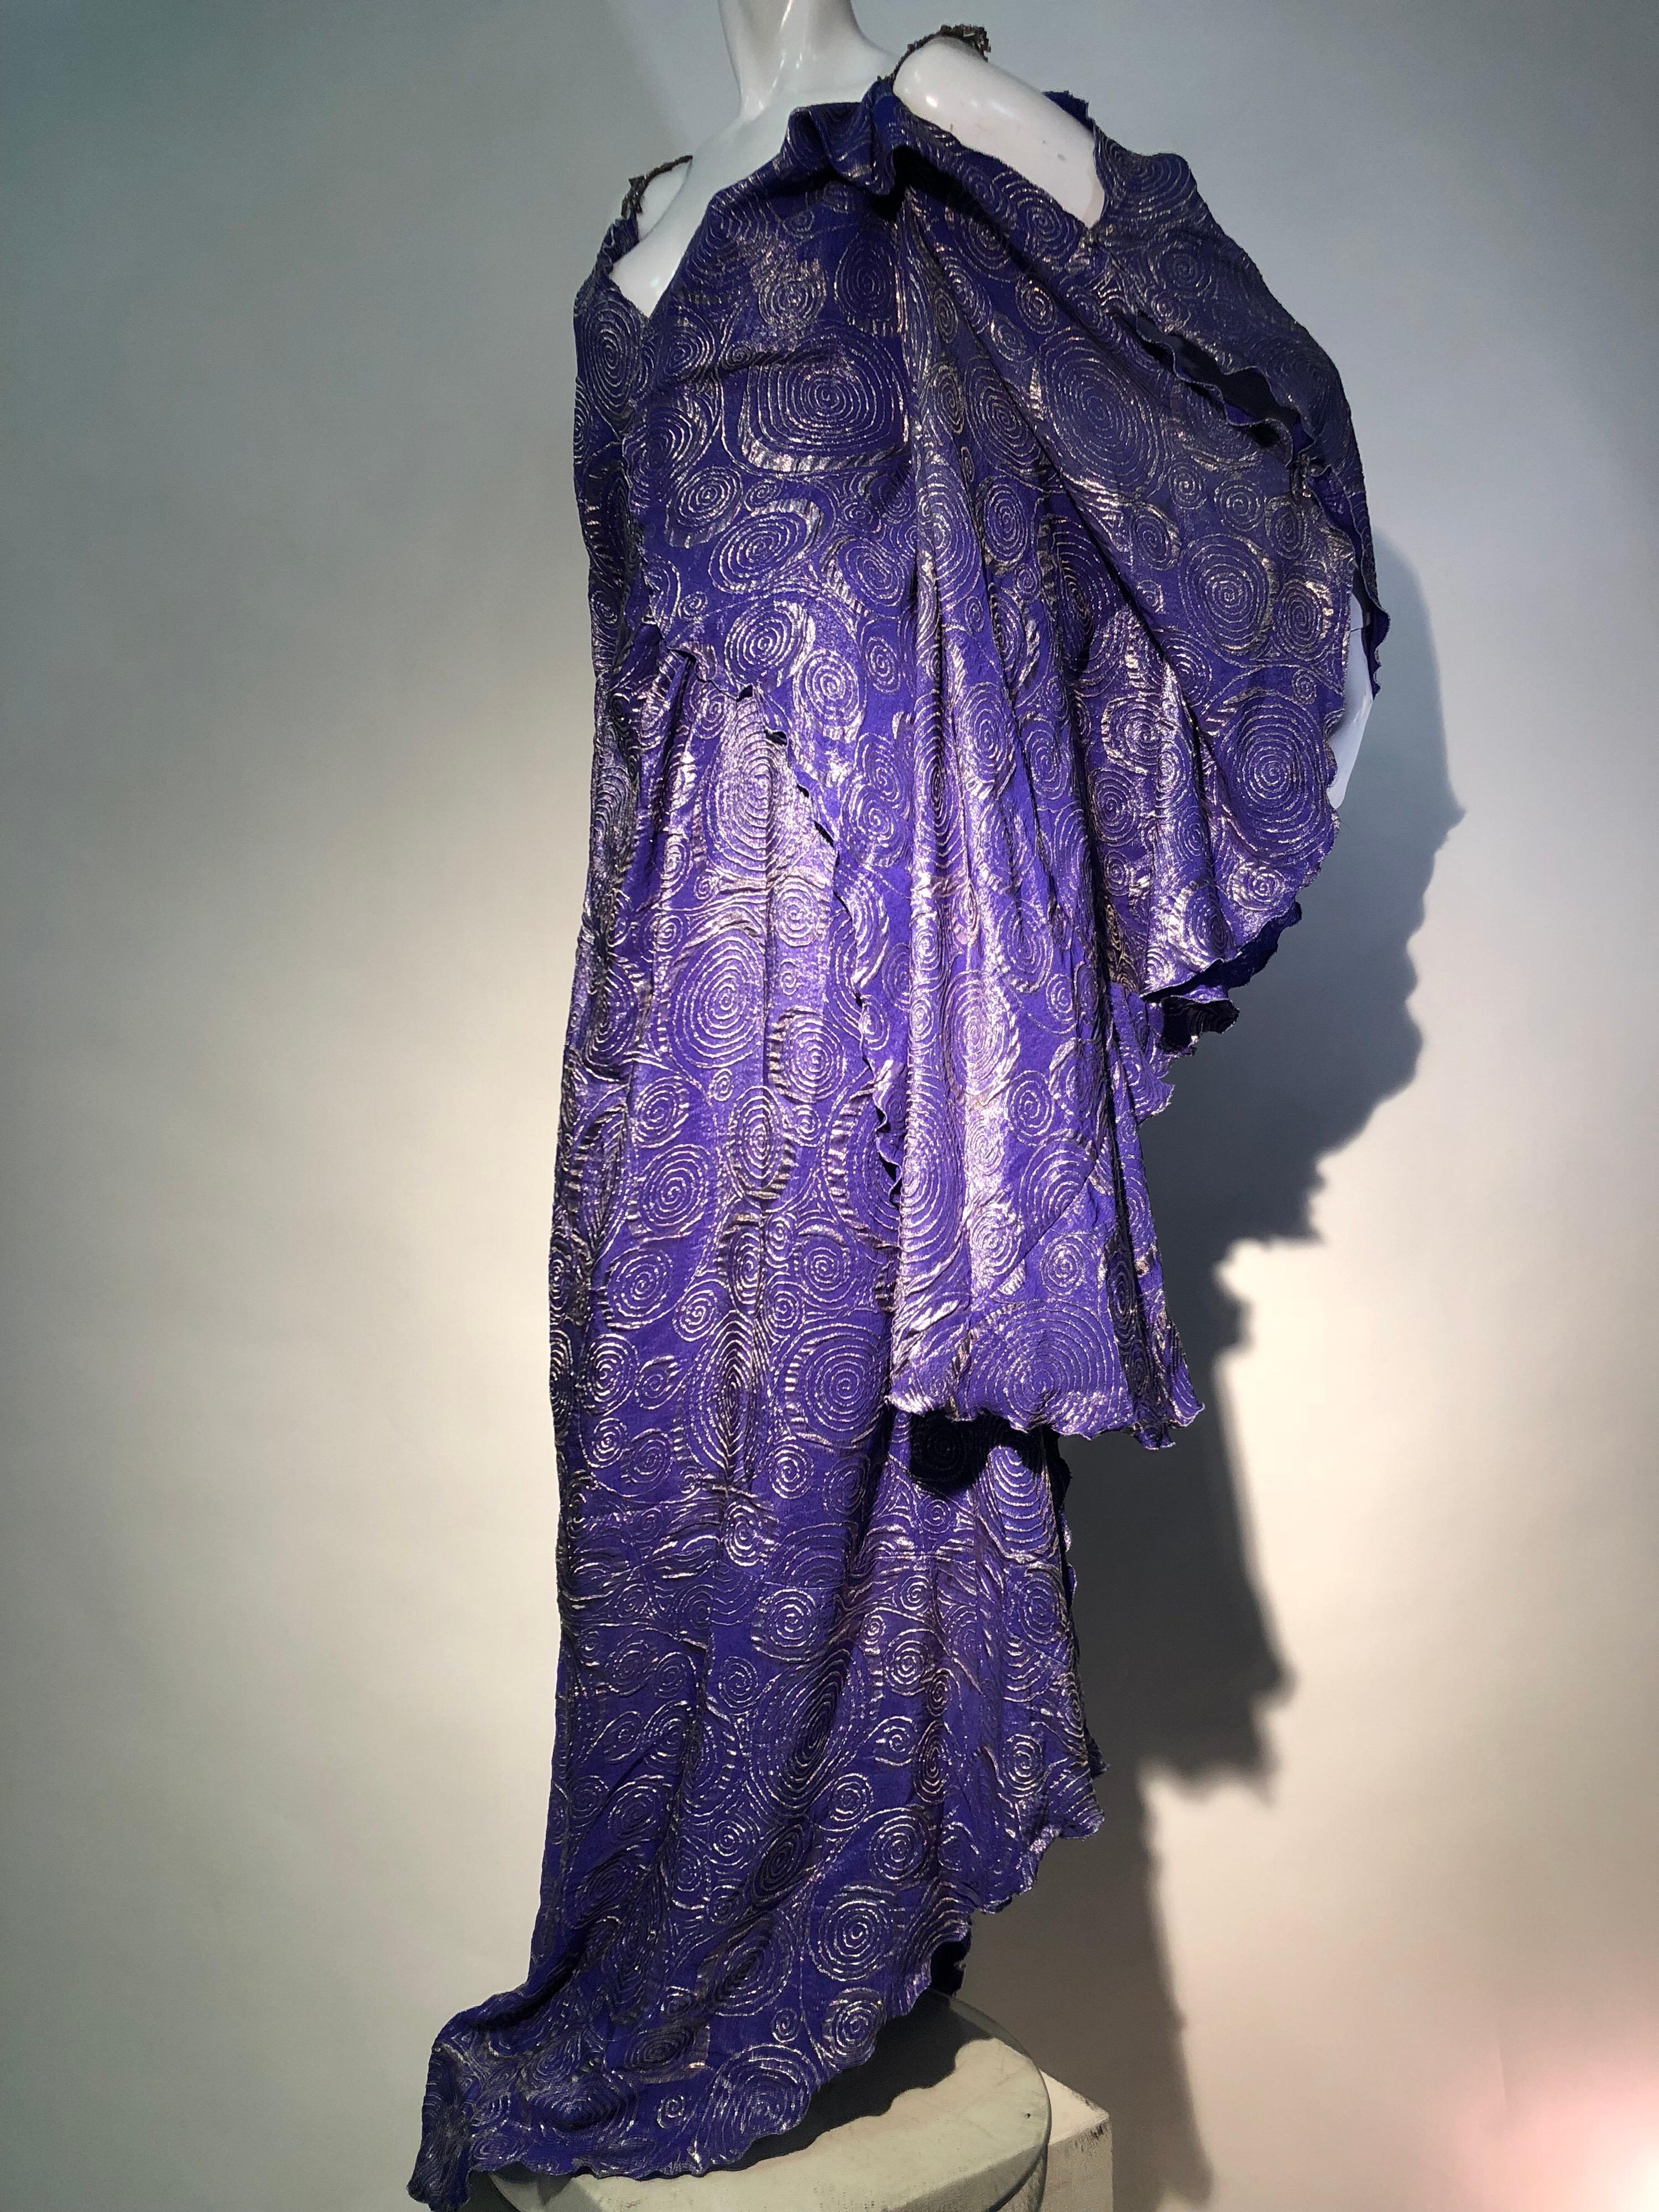 A Torso Creations 1930s-inspired, Fortuny-style violet and silver lamé swirl patterned wrap caftan with antique rhinestone shoulder straps. Fabric is original 1930s silk came from Lèon, France. Draped shoulders and open slits in arms. Lettuce styled